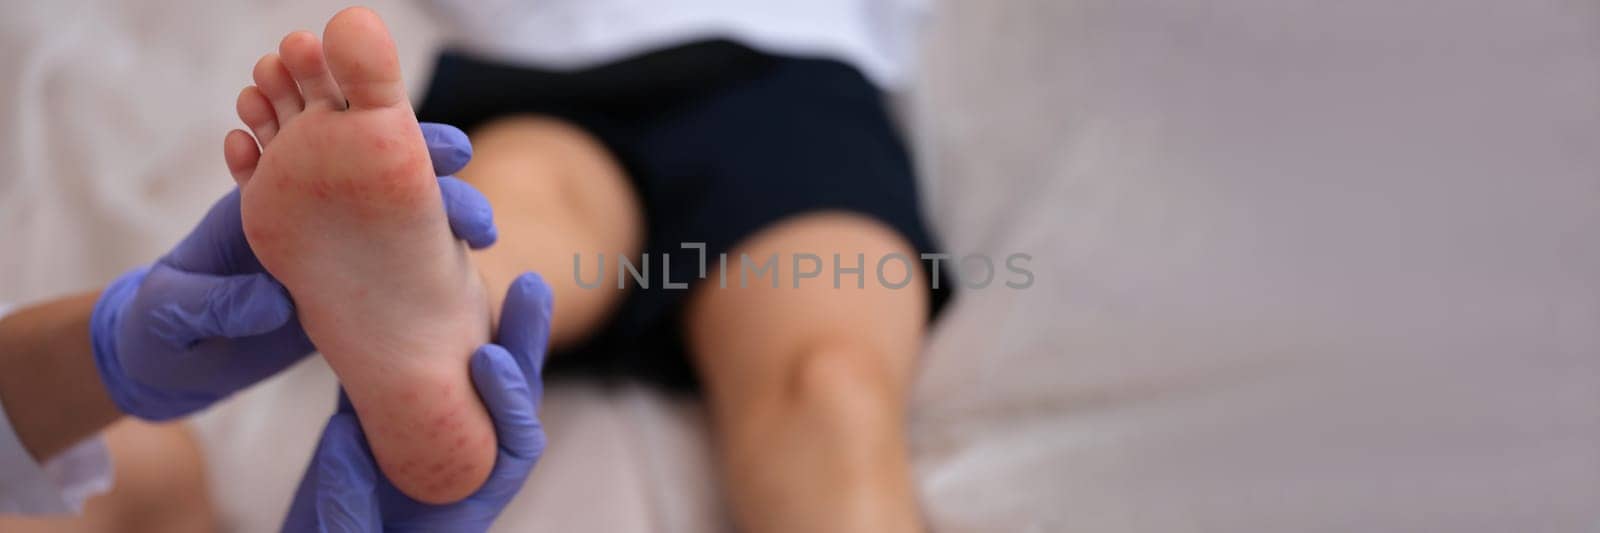 Infectious disease doctor examining rash on skin of child feet closeup by kuprevich